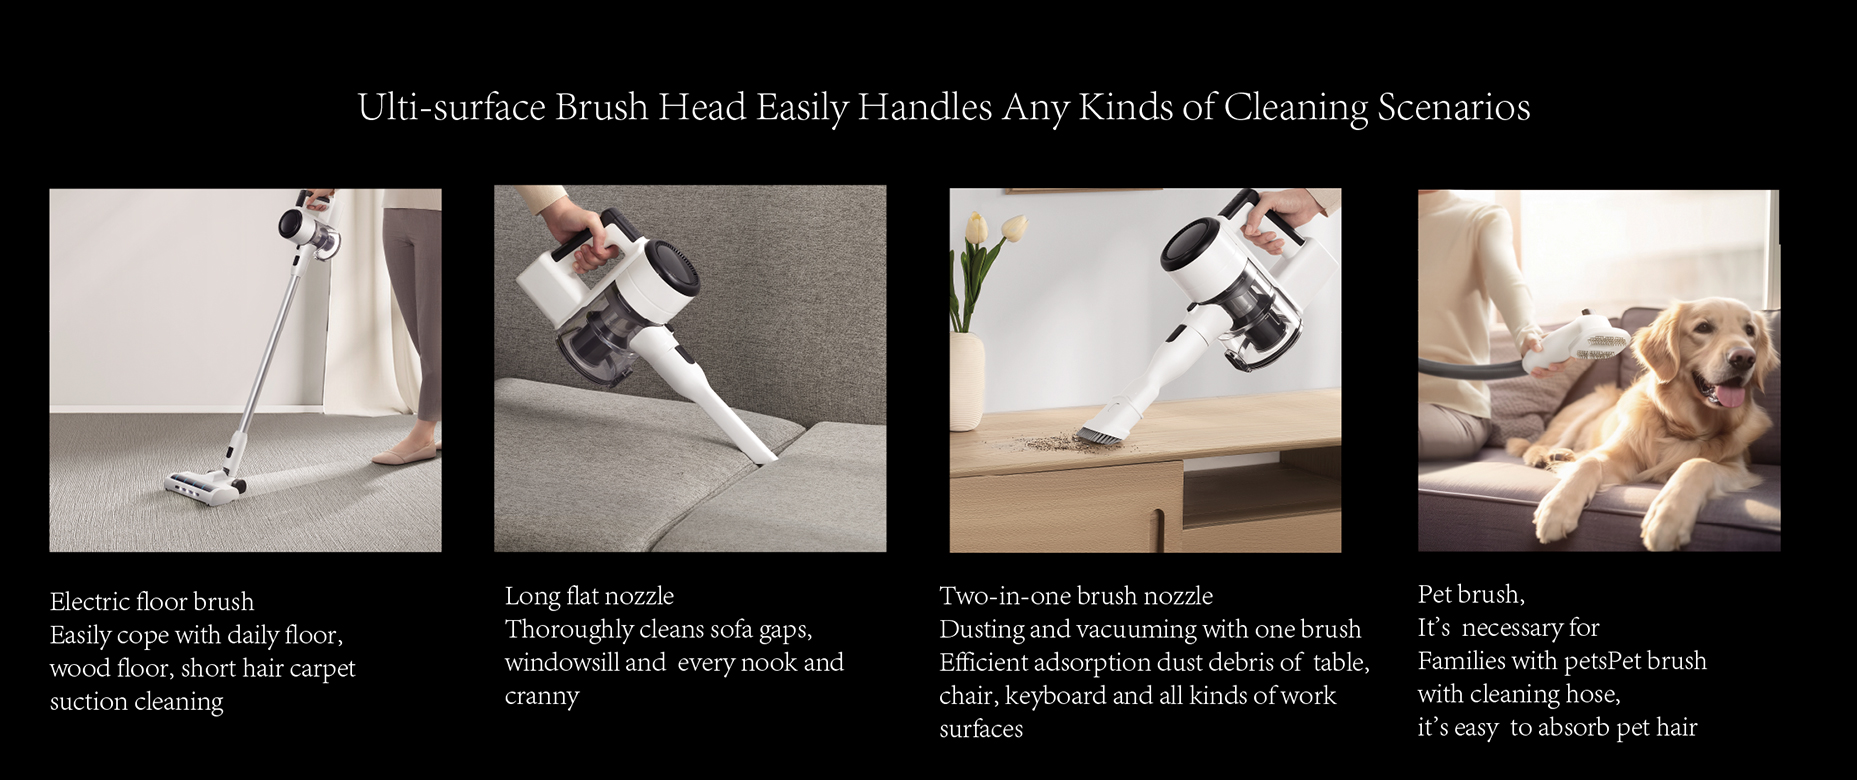 ulti-surface Brush Head Easily Handles Any Kinds of Cleaning Scenarios